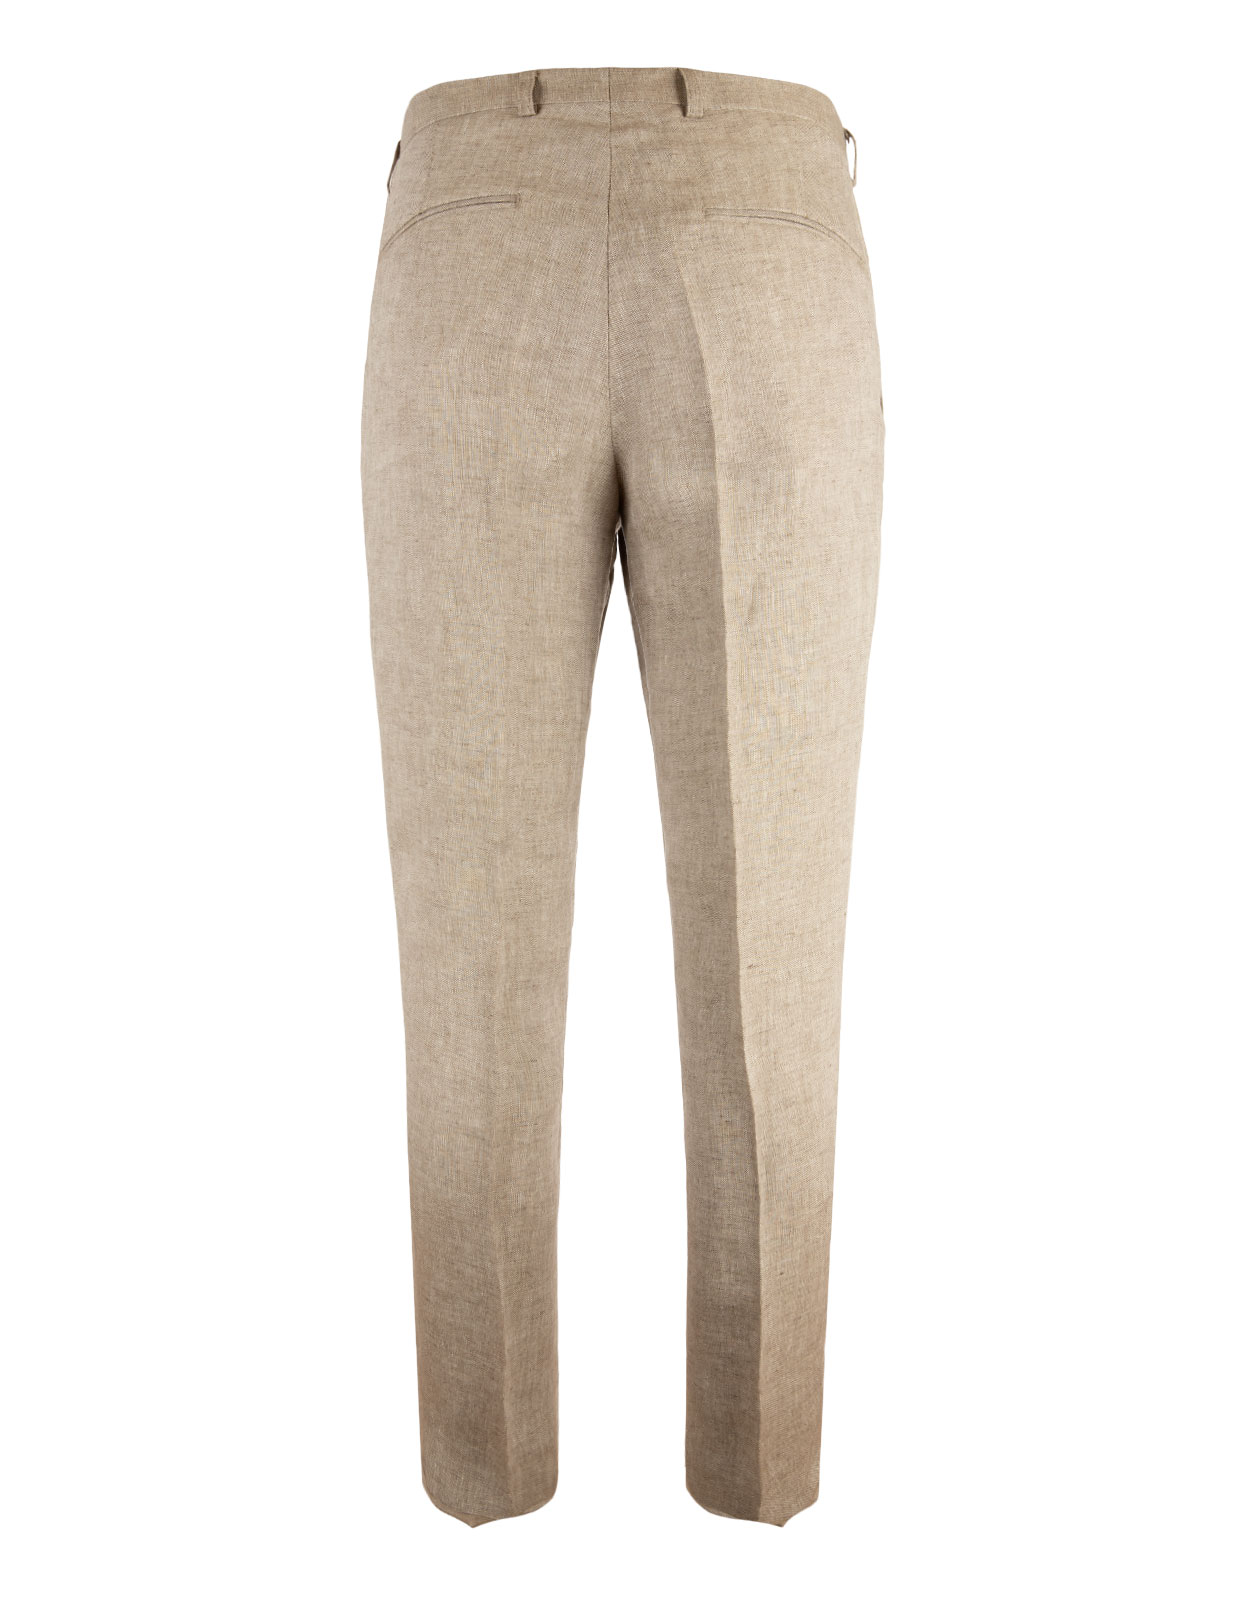 Denz Trousers Trench Beige Stl 56